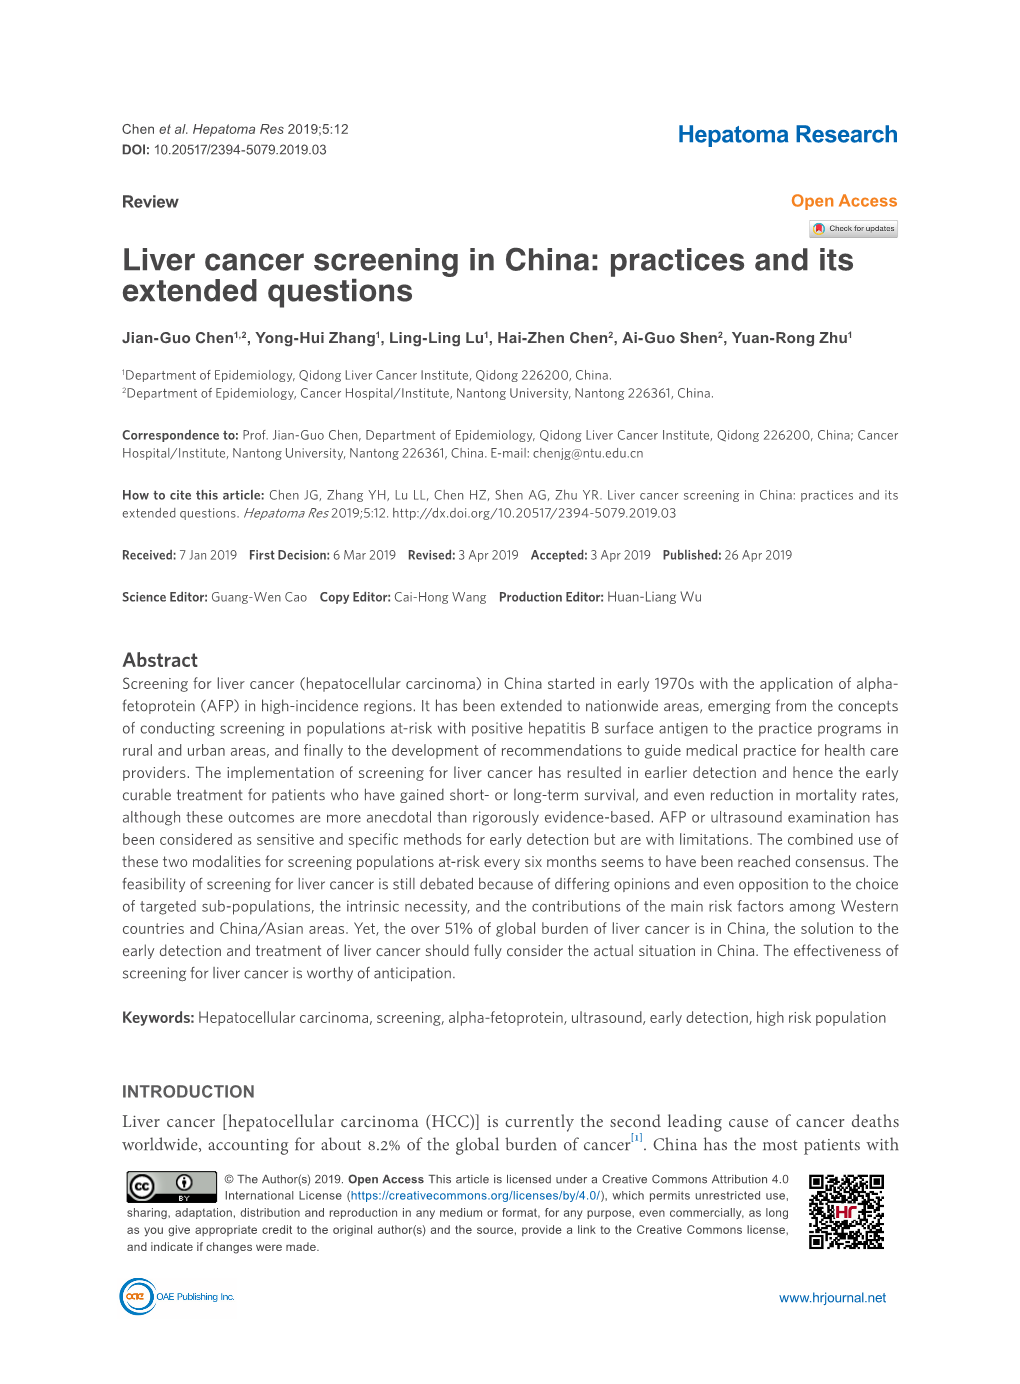 Liver Cancer Screening in China: Practices and Its Extended Questions